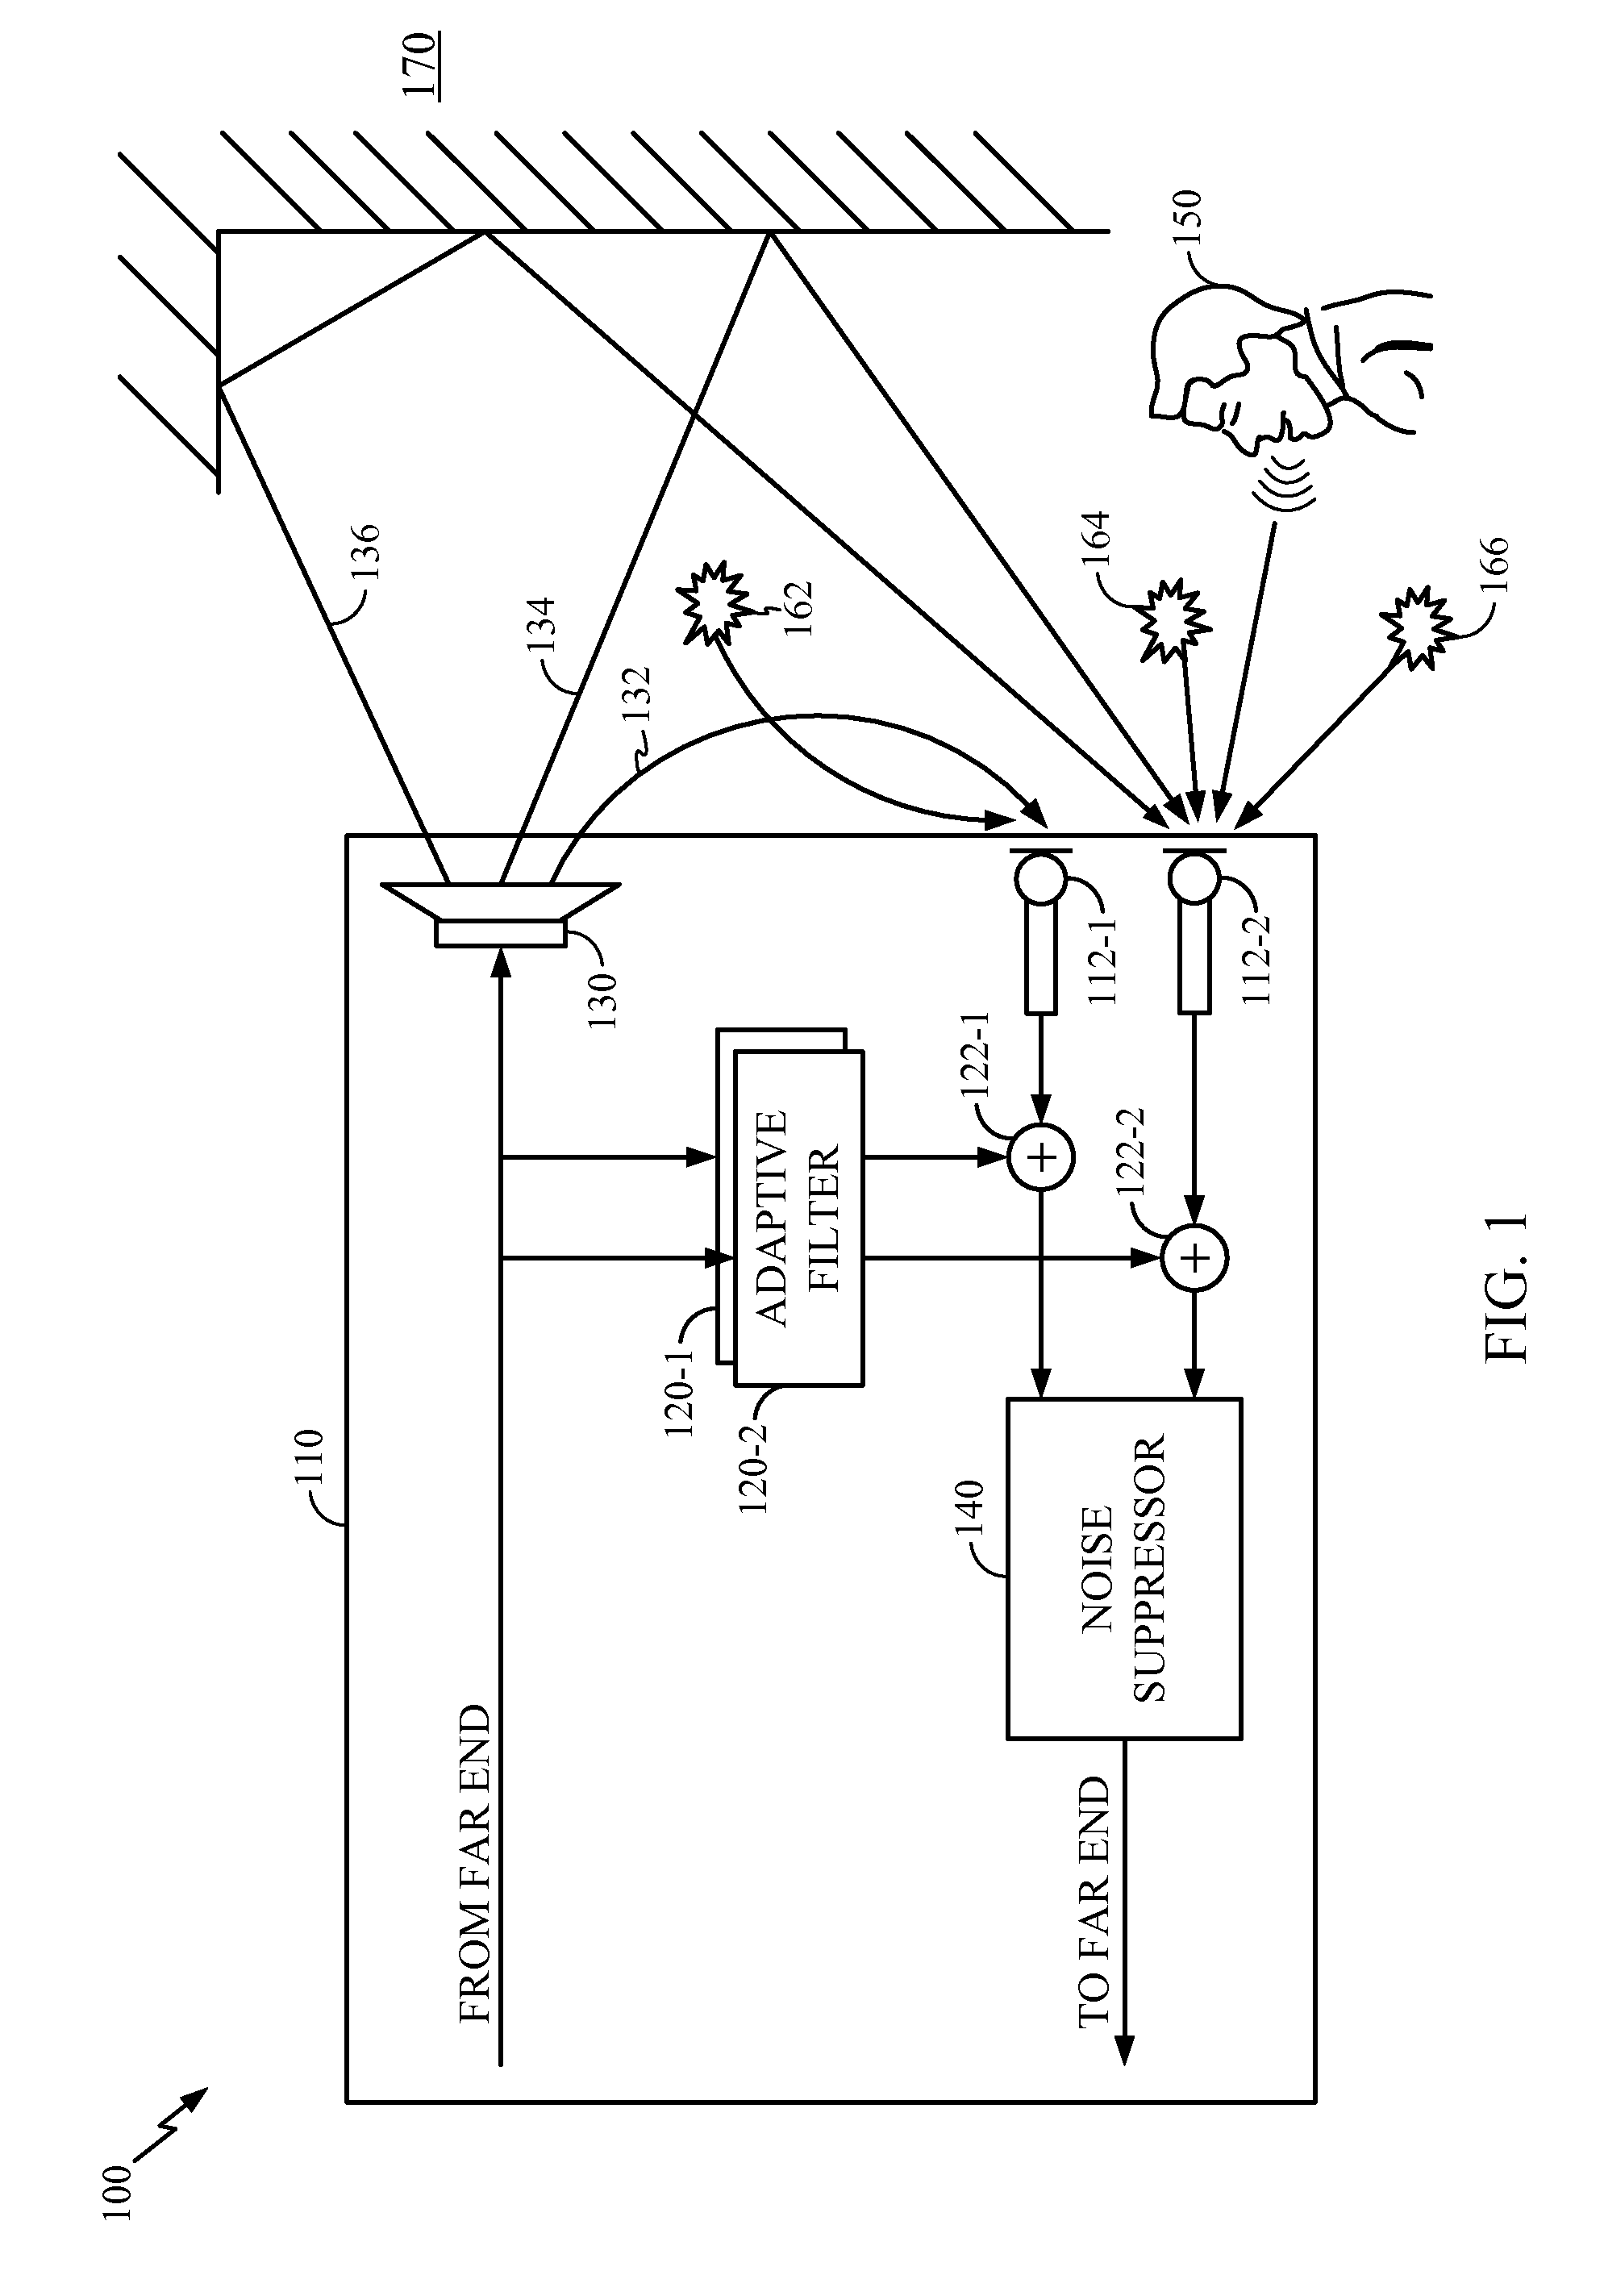 Apparatus and method of noise and echo reduction in multiple microphone audio systems